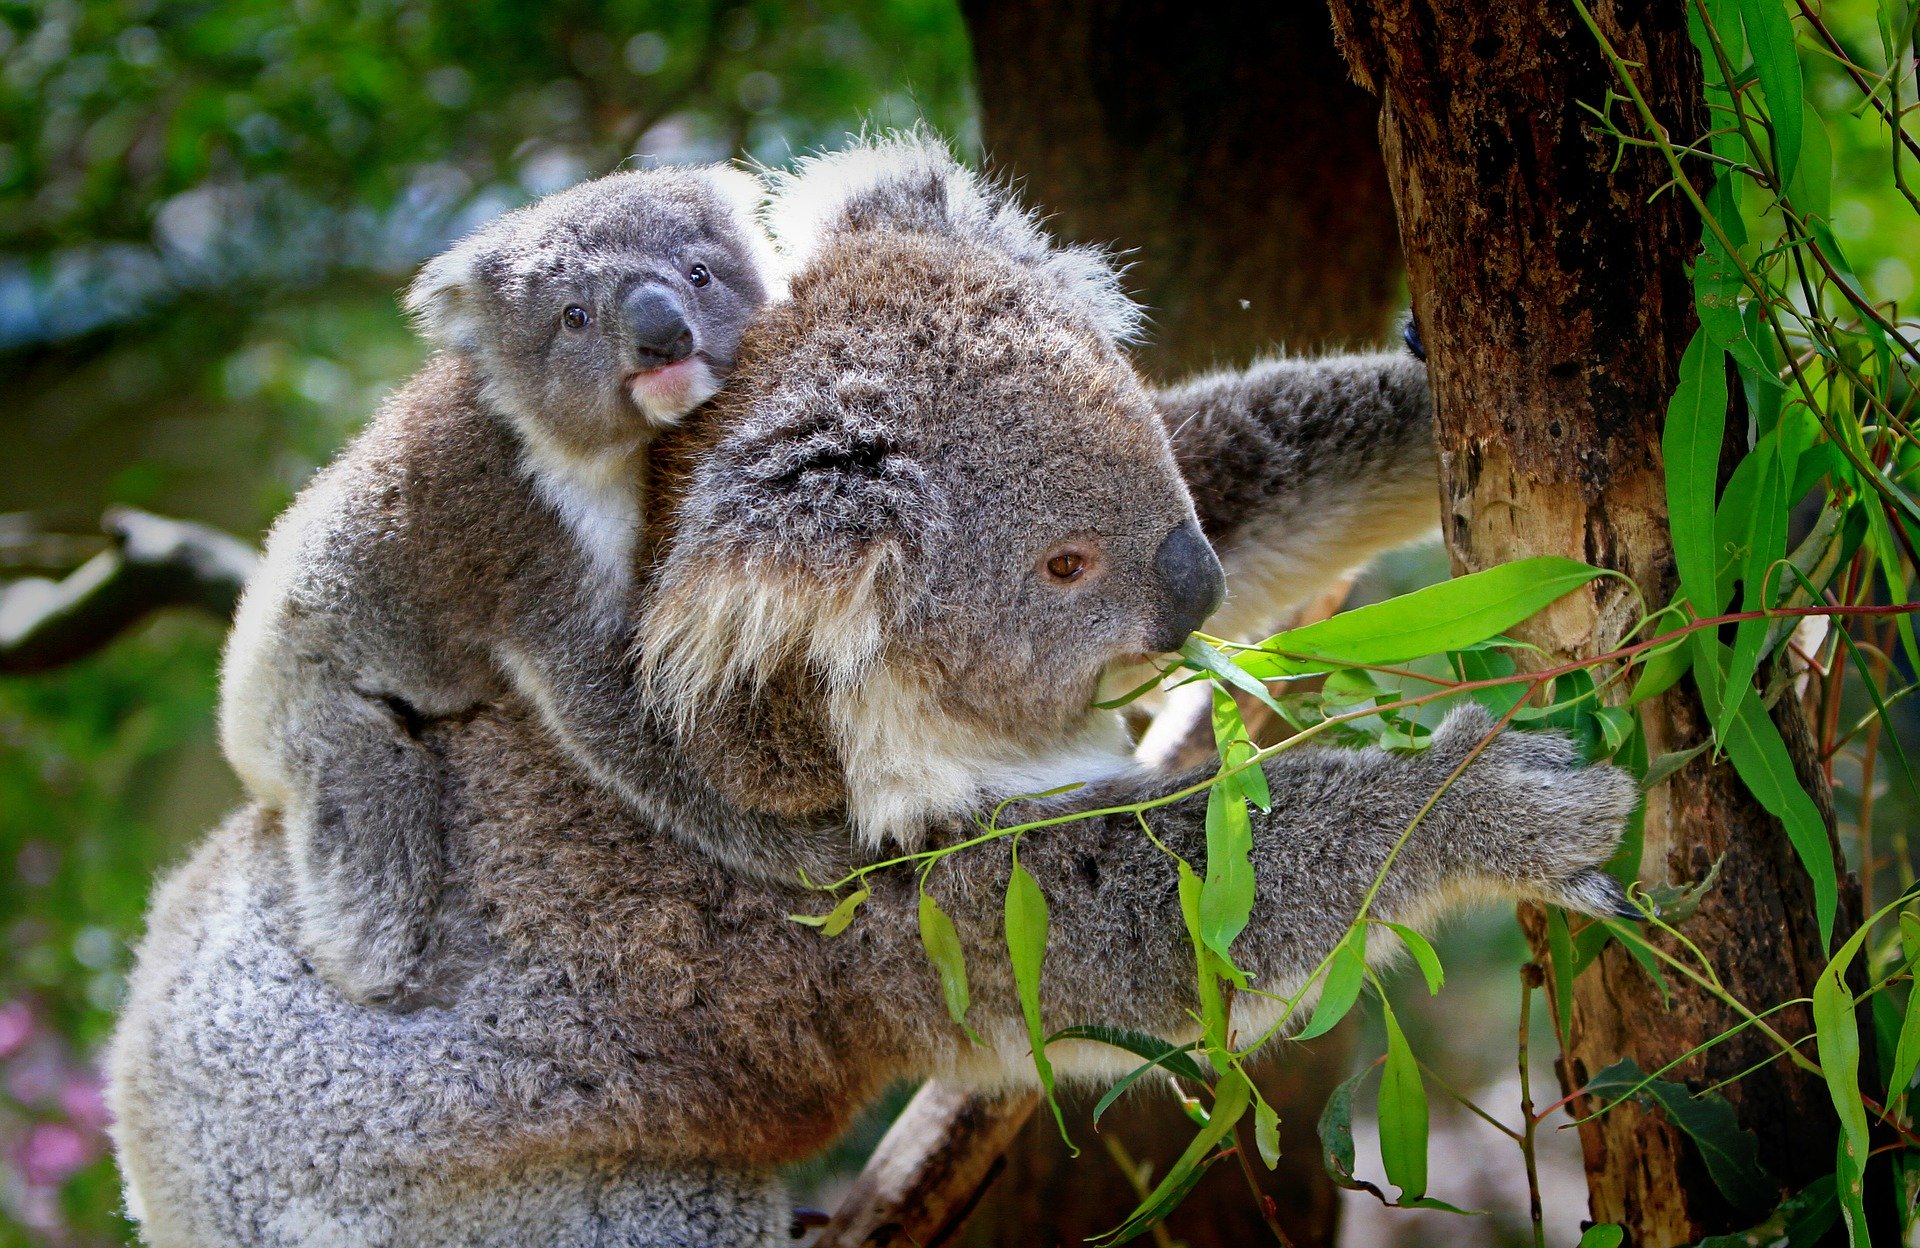 The koala population faces an immediate threat of extinction after the Australia bushfires, new report finds karyomitotic